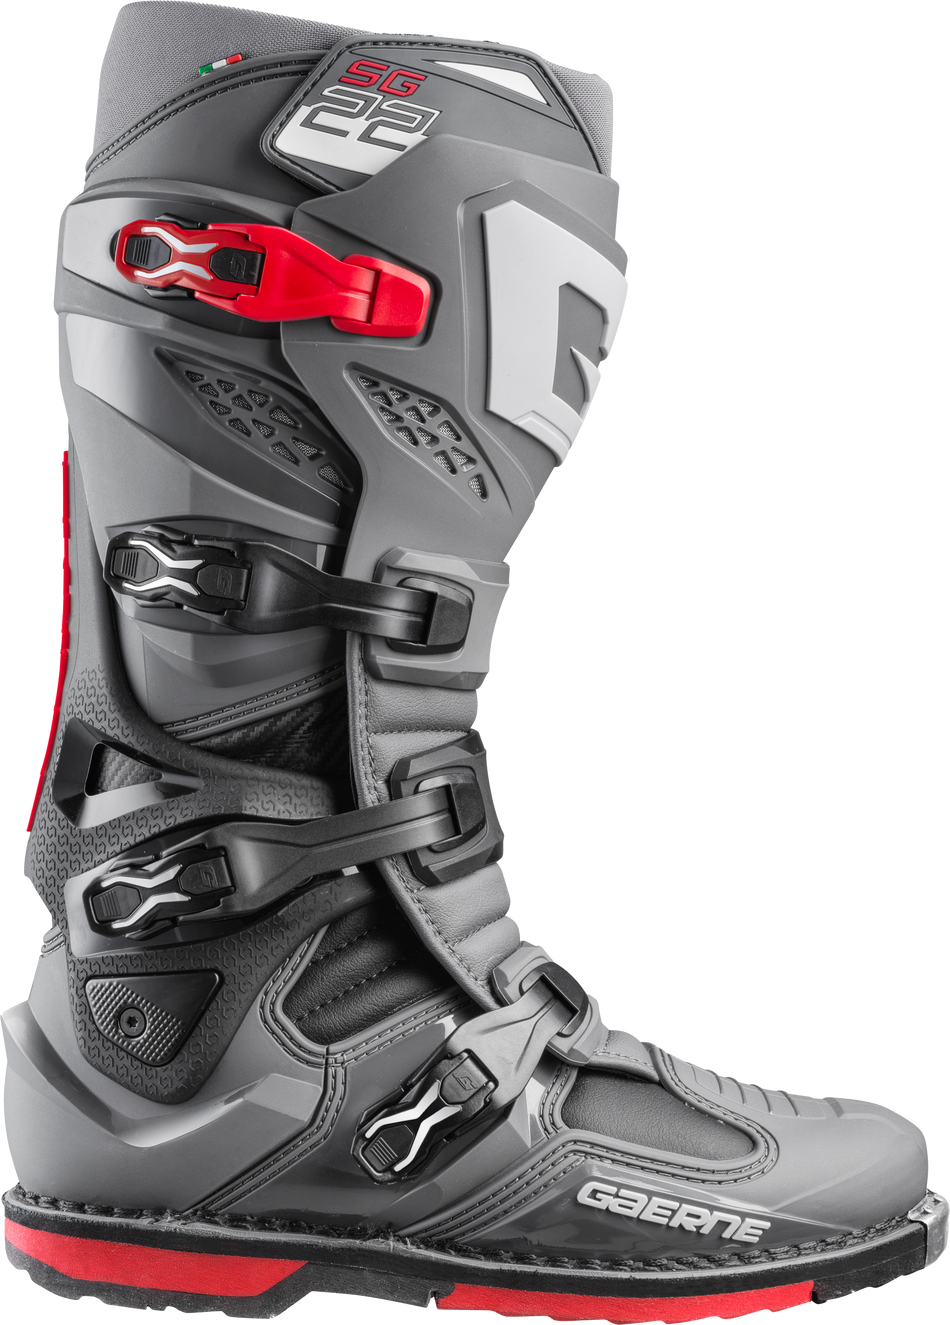 GAERNE Sg-22 Boots Anthracite/Black/Red Sz 09 2262-007-09